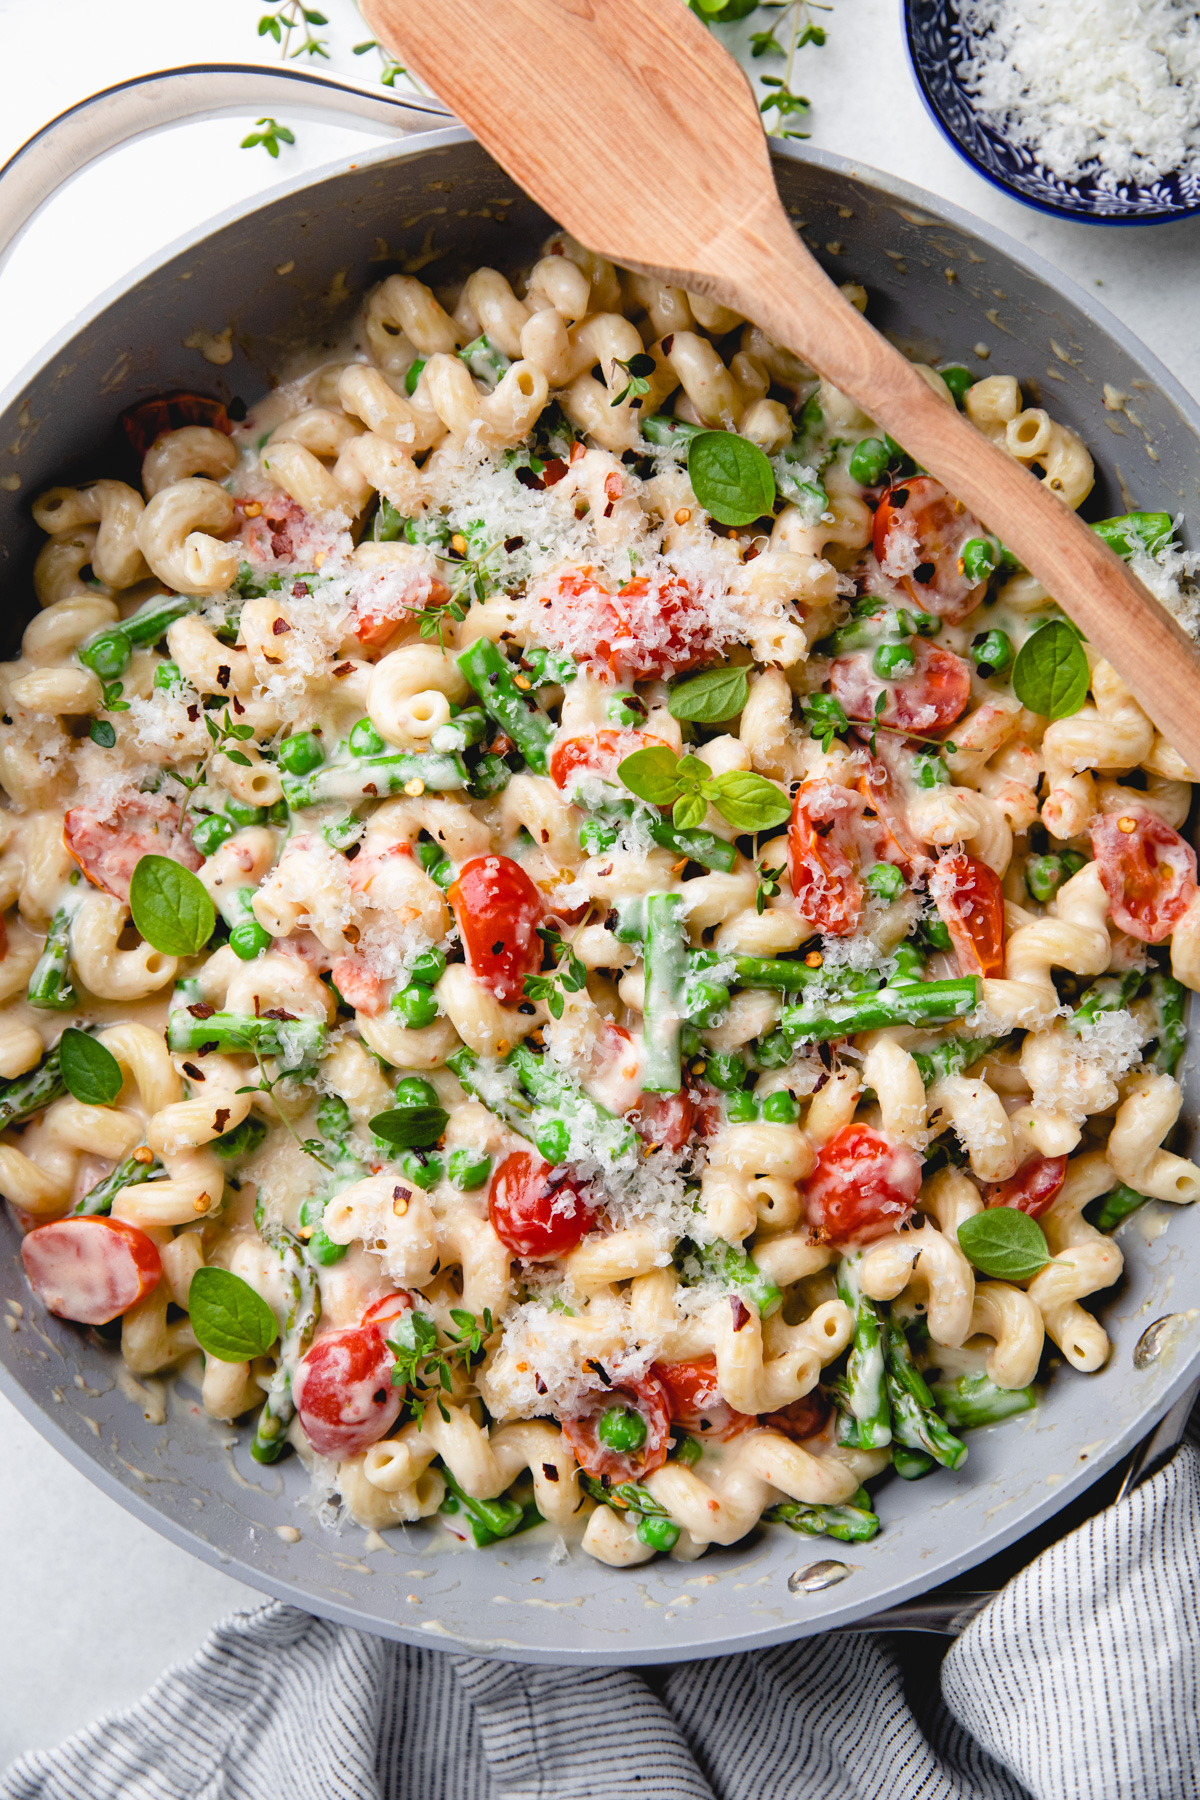 Pasta with cherry tomatoes, asparagus, peas, and creamy sauce.